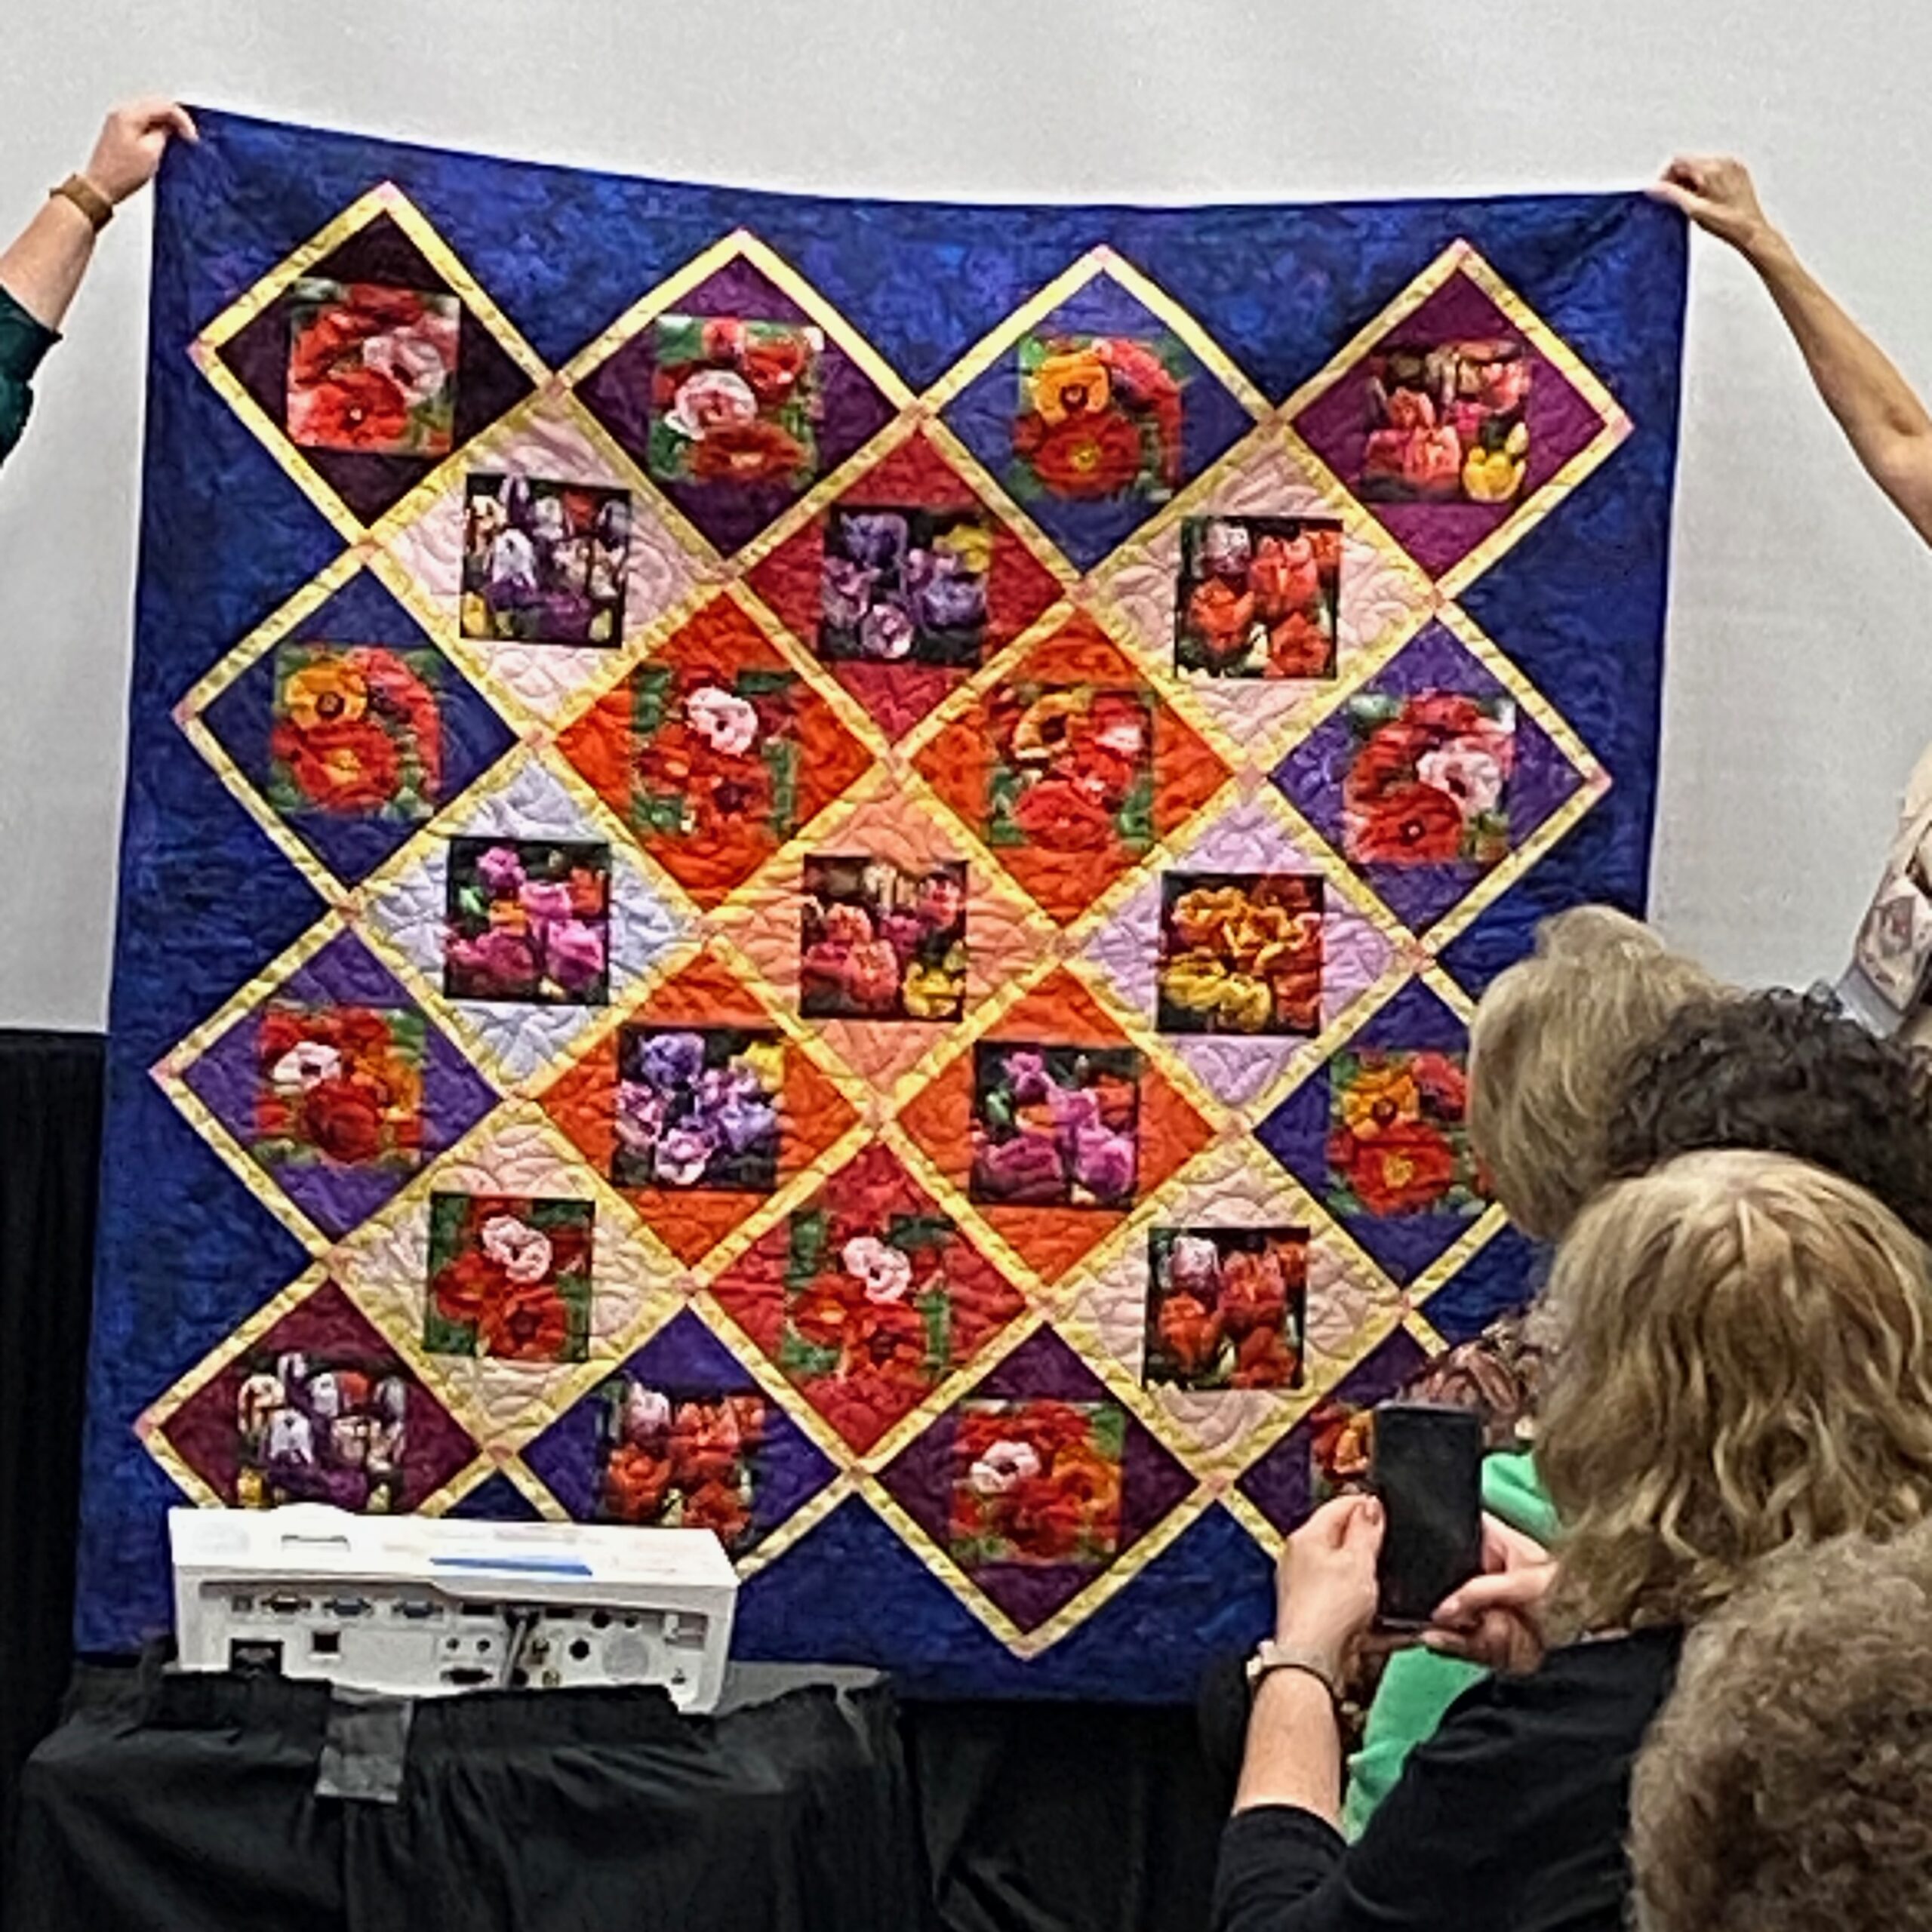 Quilting with Panels and patchwork - Quilt 6 - Image